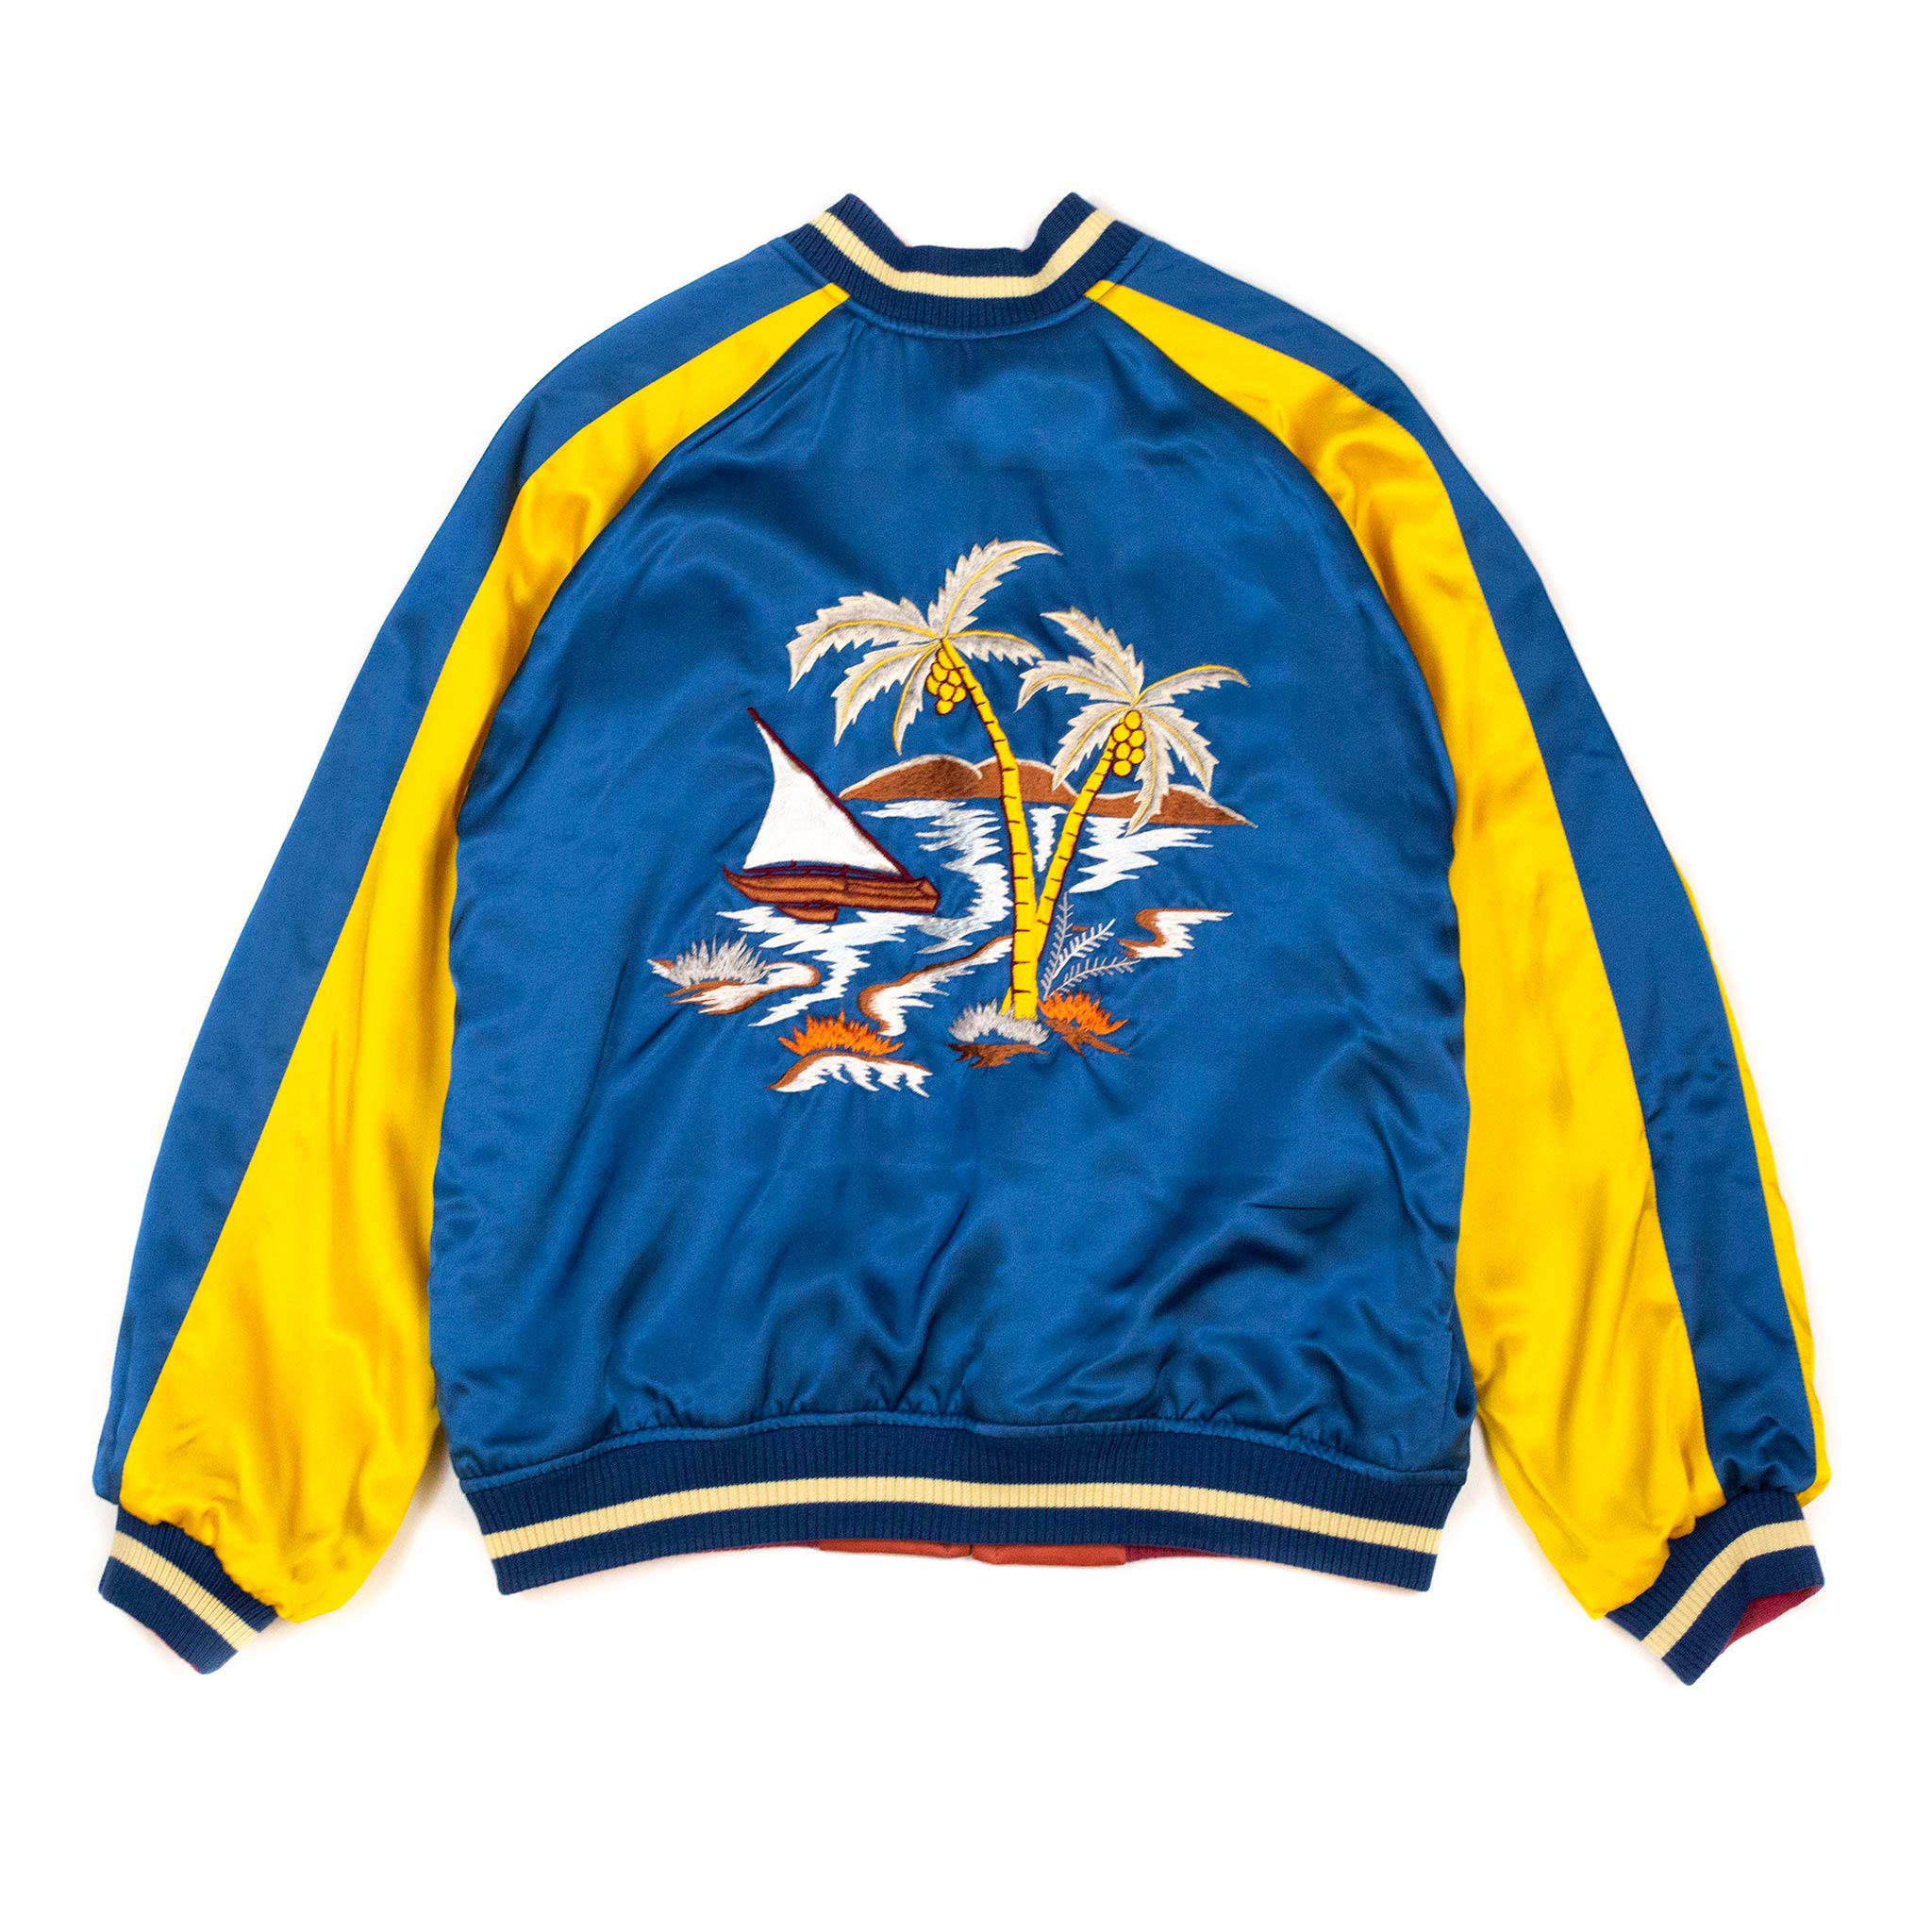 The Real McCoy's MJ20026 Suka Jacket / Philippines Red/Blue